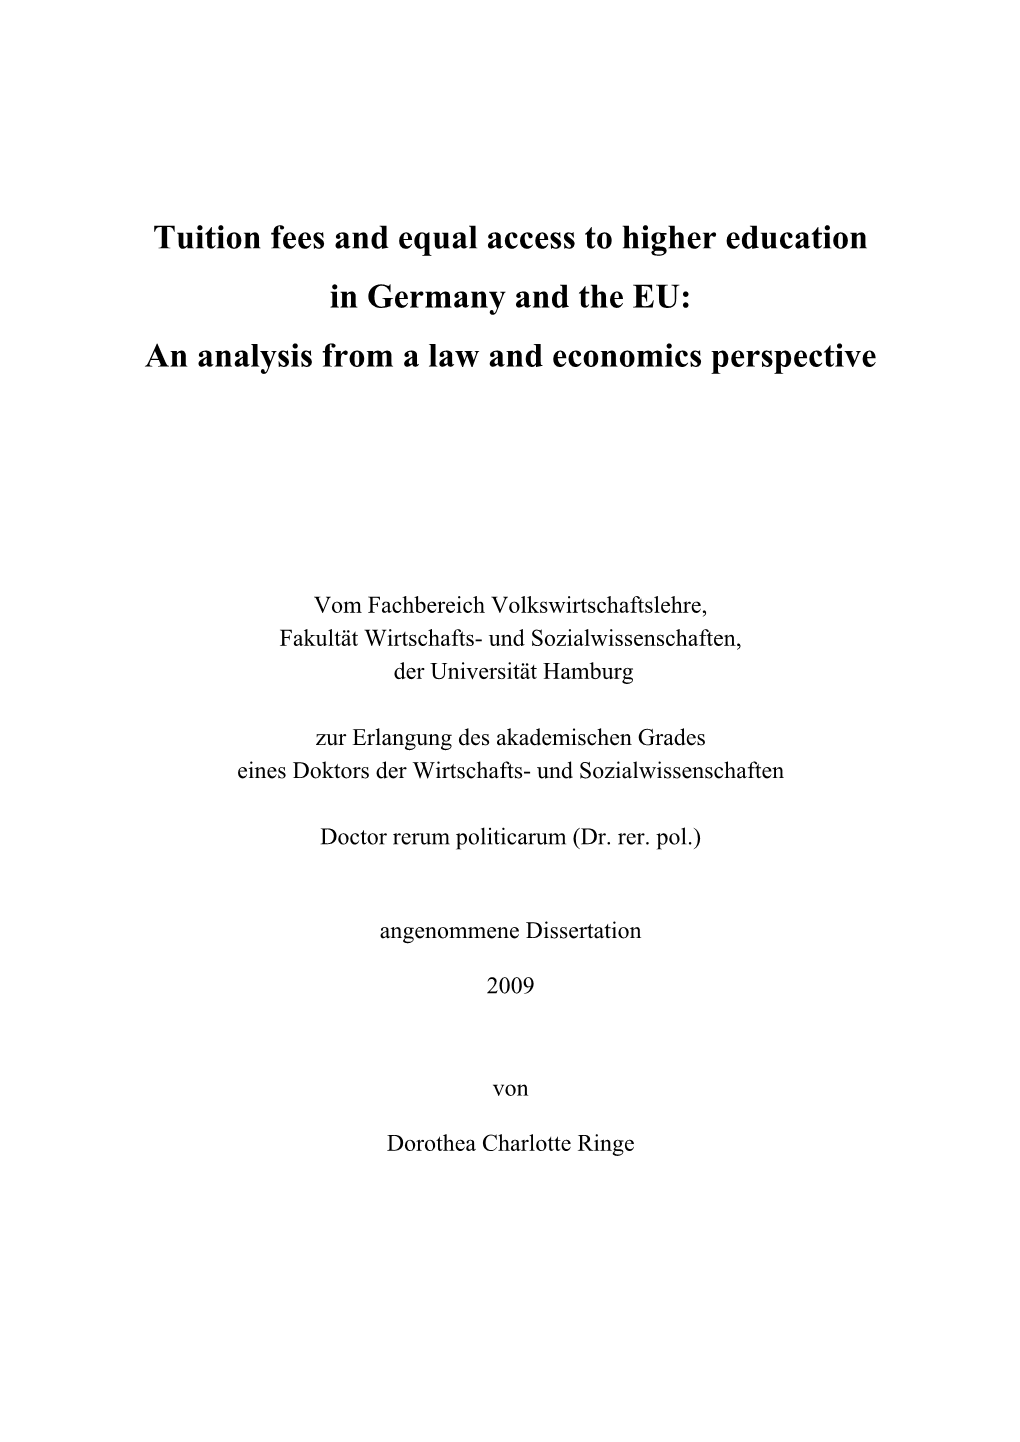 Tuition Fees and Equal Access to Higher Education in Germany and the EU: an Analysis from a Law and Economics Perspective